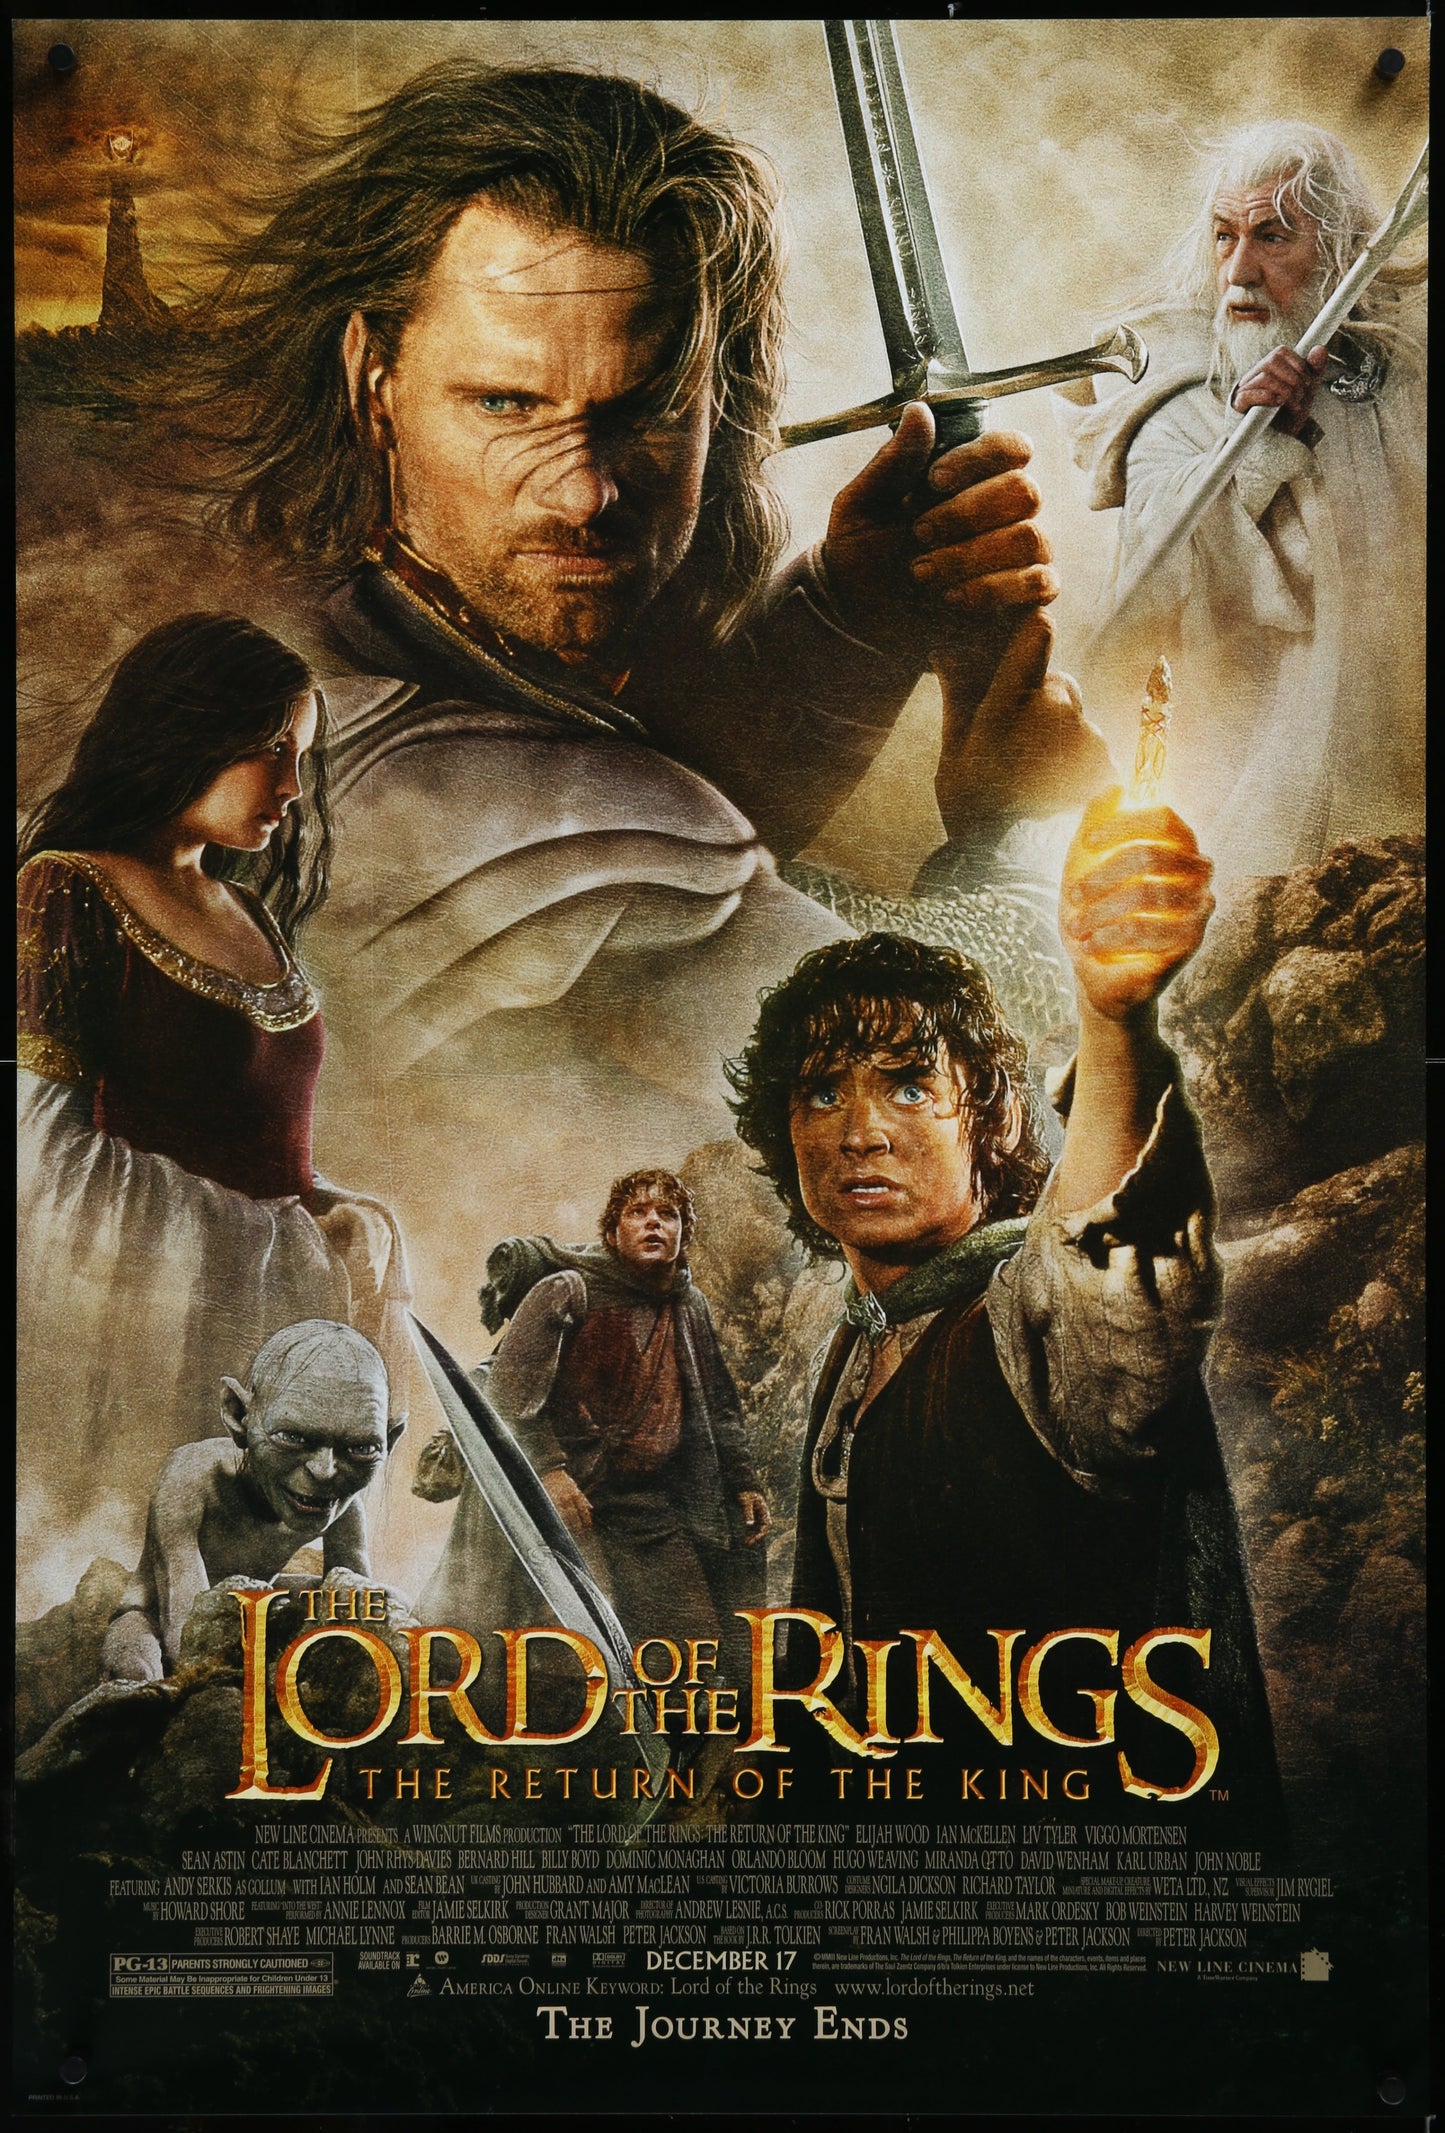 The Lord Of The Rings: The Return Of The King - posterpalace.com